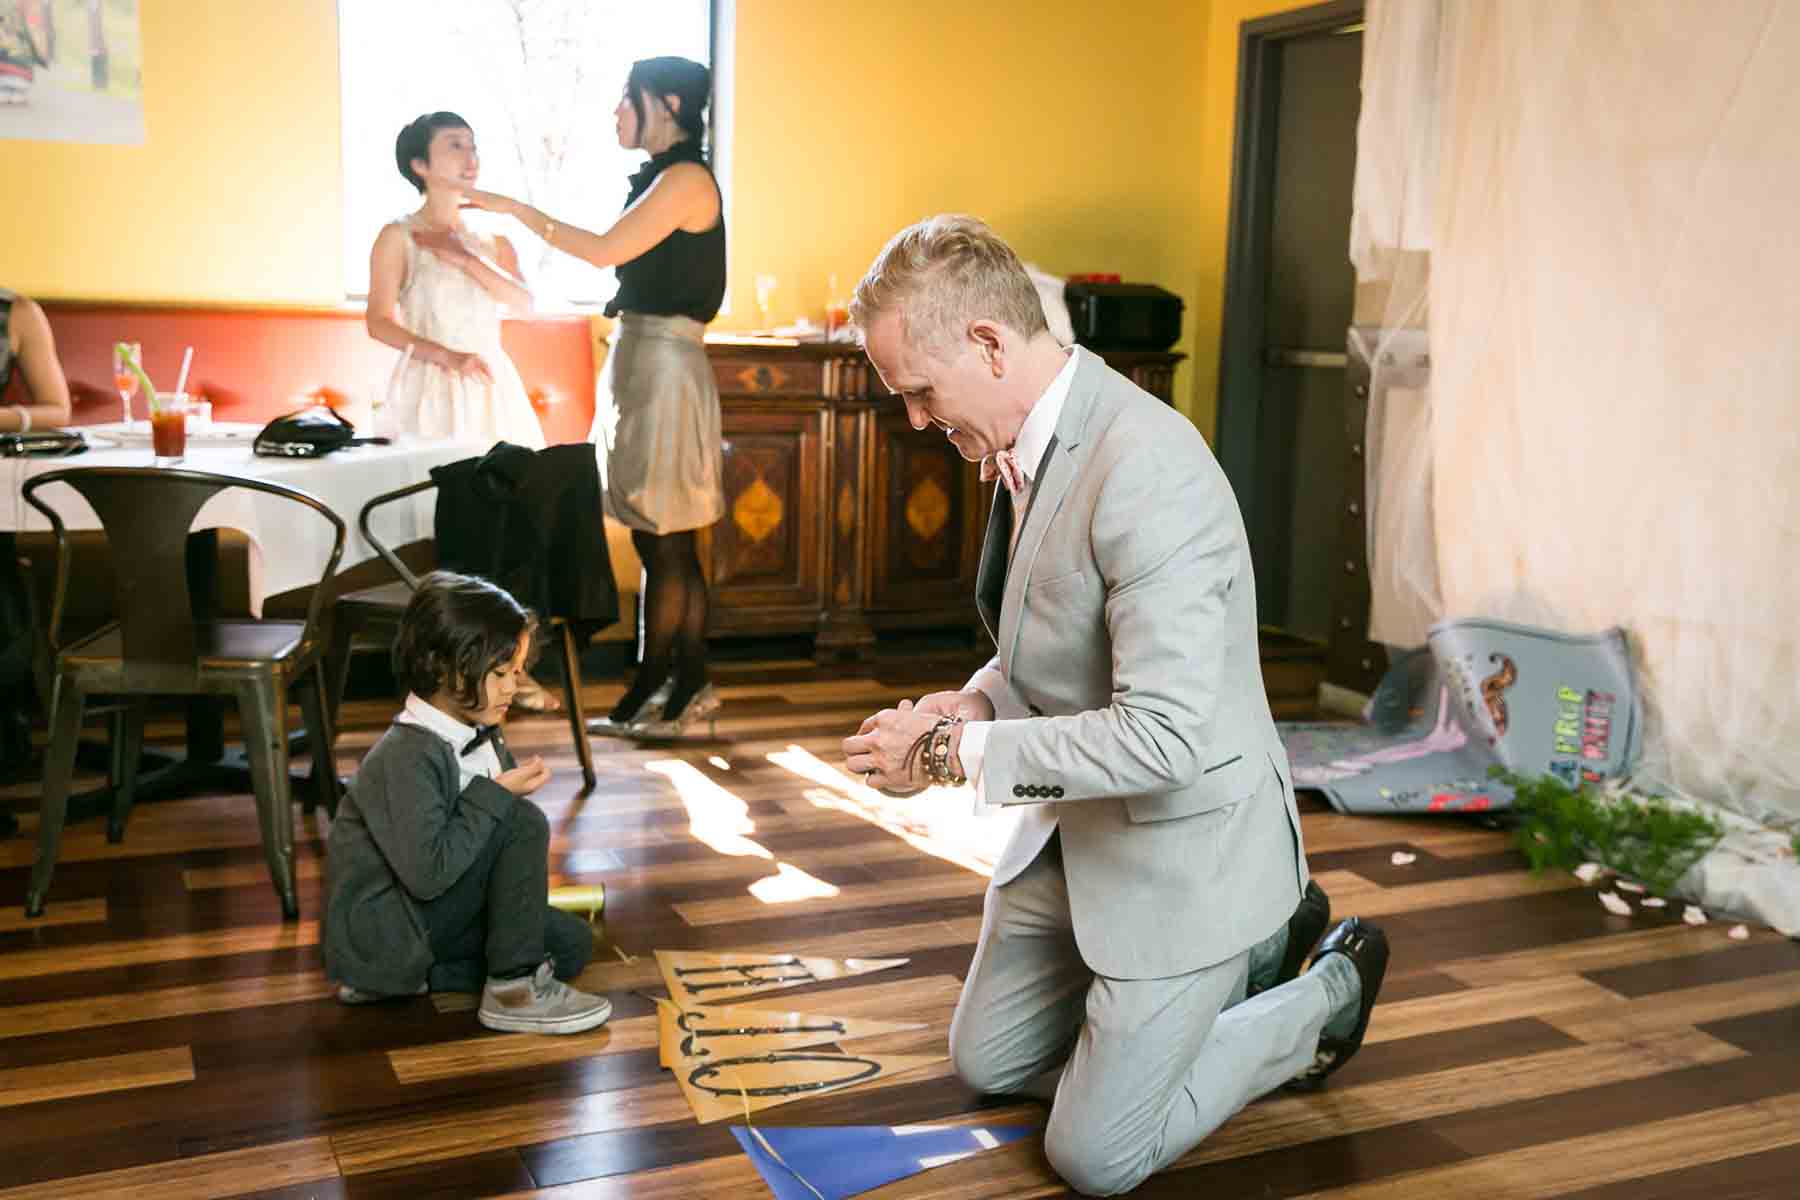 Man kneeling on floor with little boy trying to put together a wedding decorative banner for an article on the best wedding jobs for family and friends